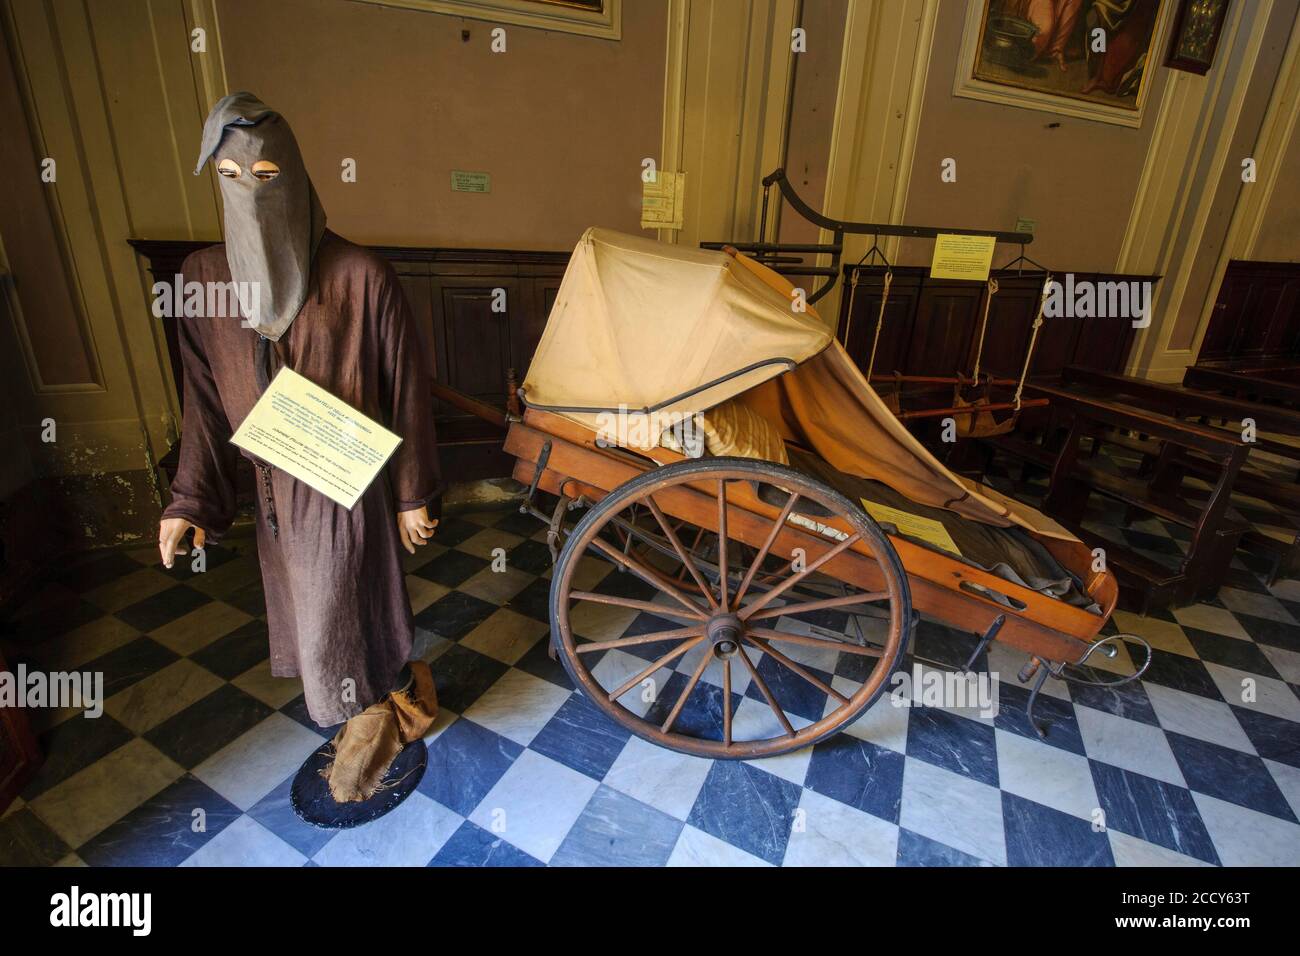 Figure of Plague Doctor in the Middle Ages, Misericordia, historical medical outpatient clinic, Volterra, Tuscany Italy Stock Photo